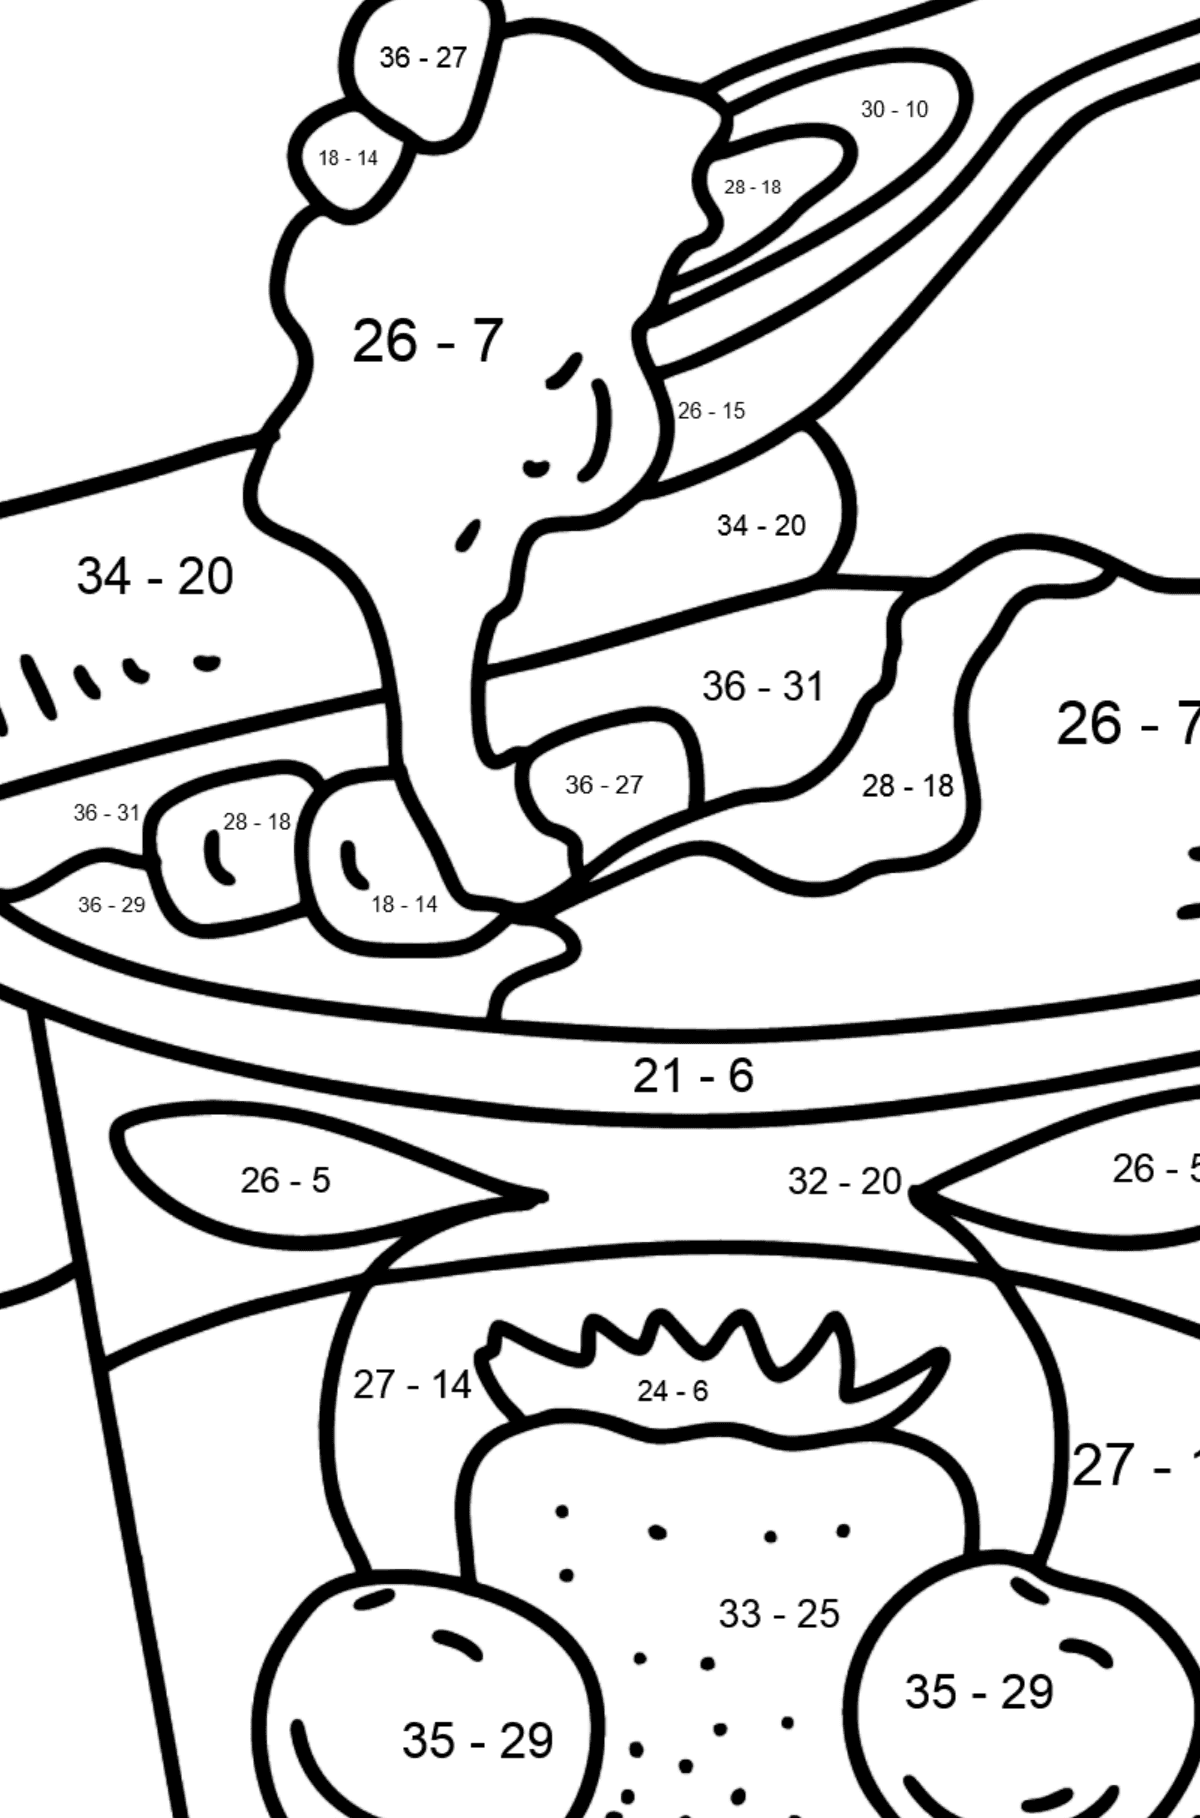 Yogurt with Berries coloring page - Math Coloring - Subtraction for Kids